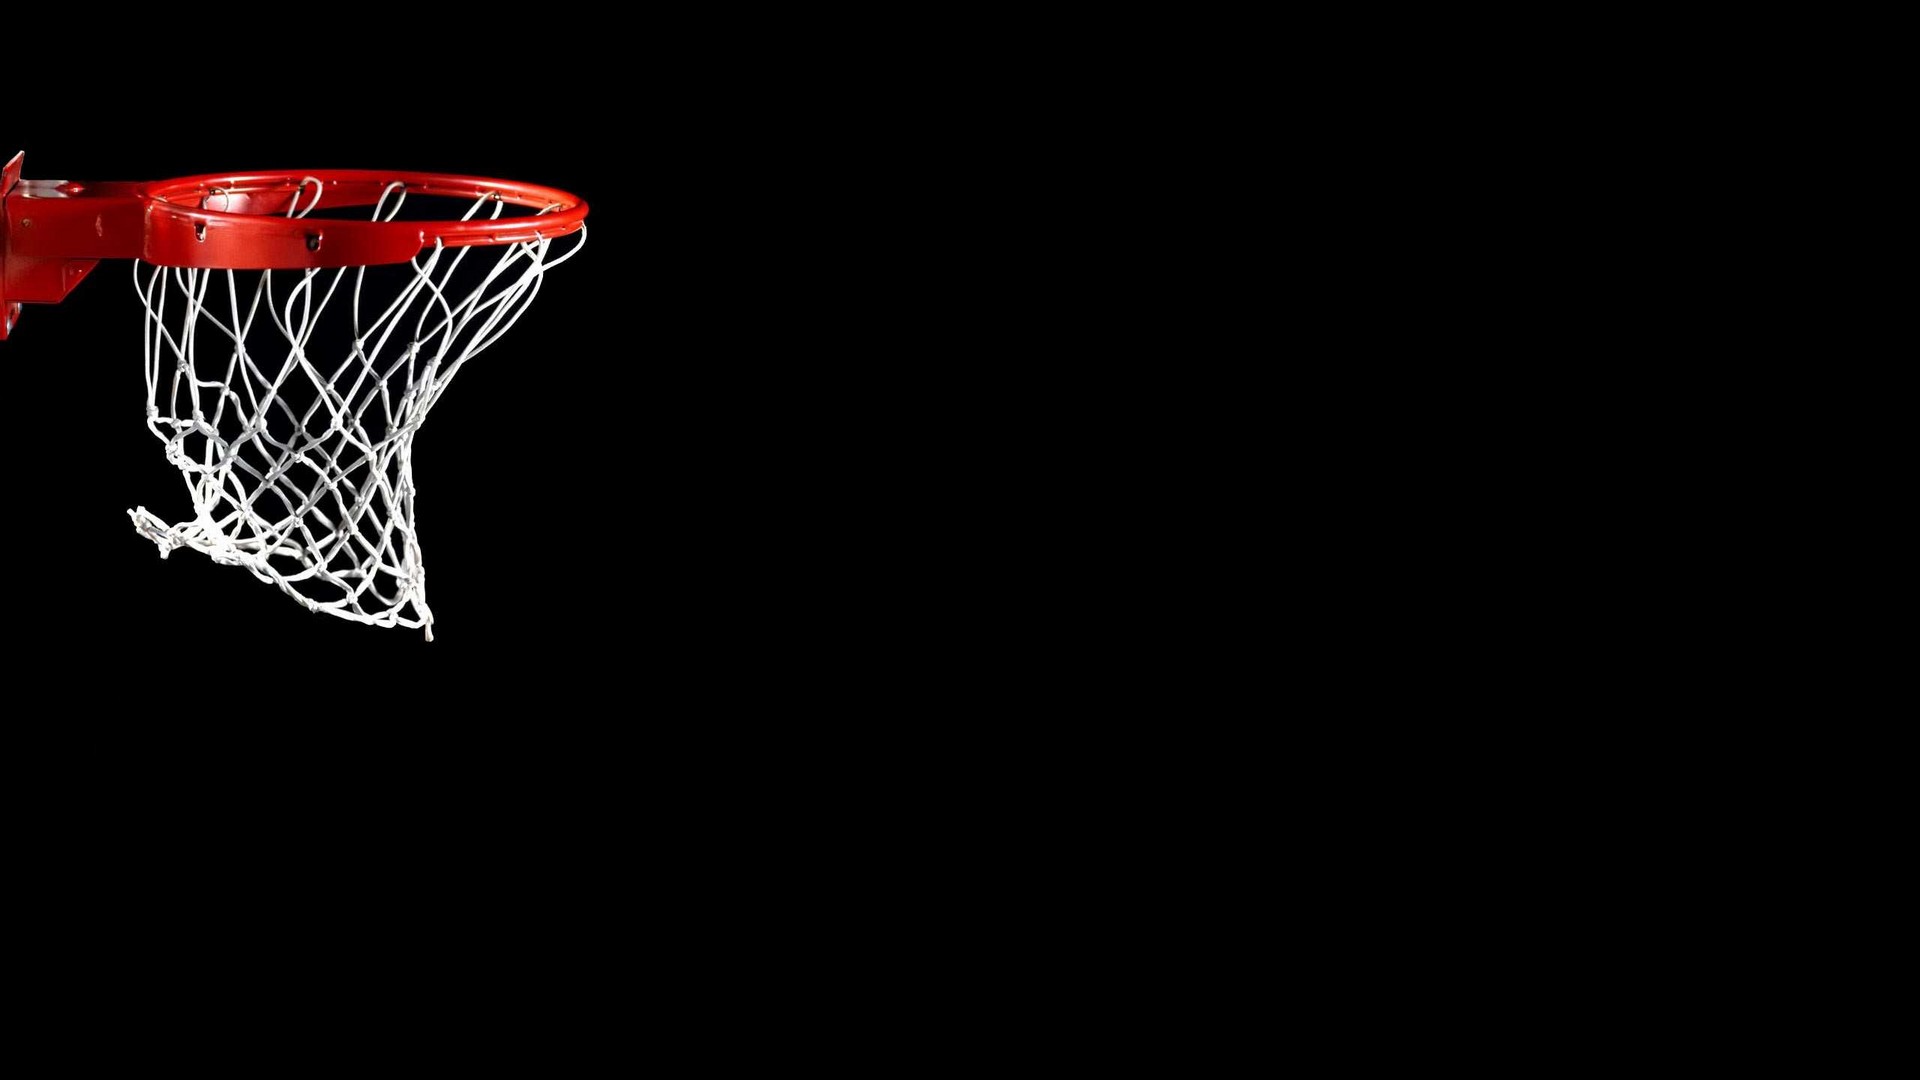 Windows Wallpaper Basketball with image dimensions 1920x1080 pixel. You can make this wallpaper for your Desktop Computer Backgrounds, Windows or Mac Screensavers, iPhone Lock screen, Tablet or Android and another Mobile Phone device